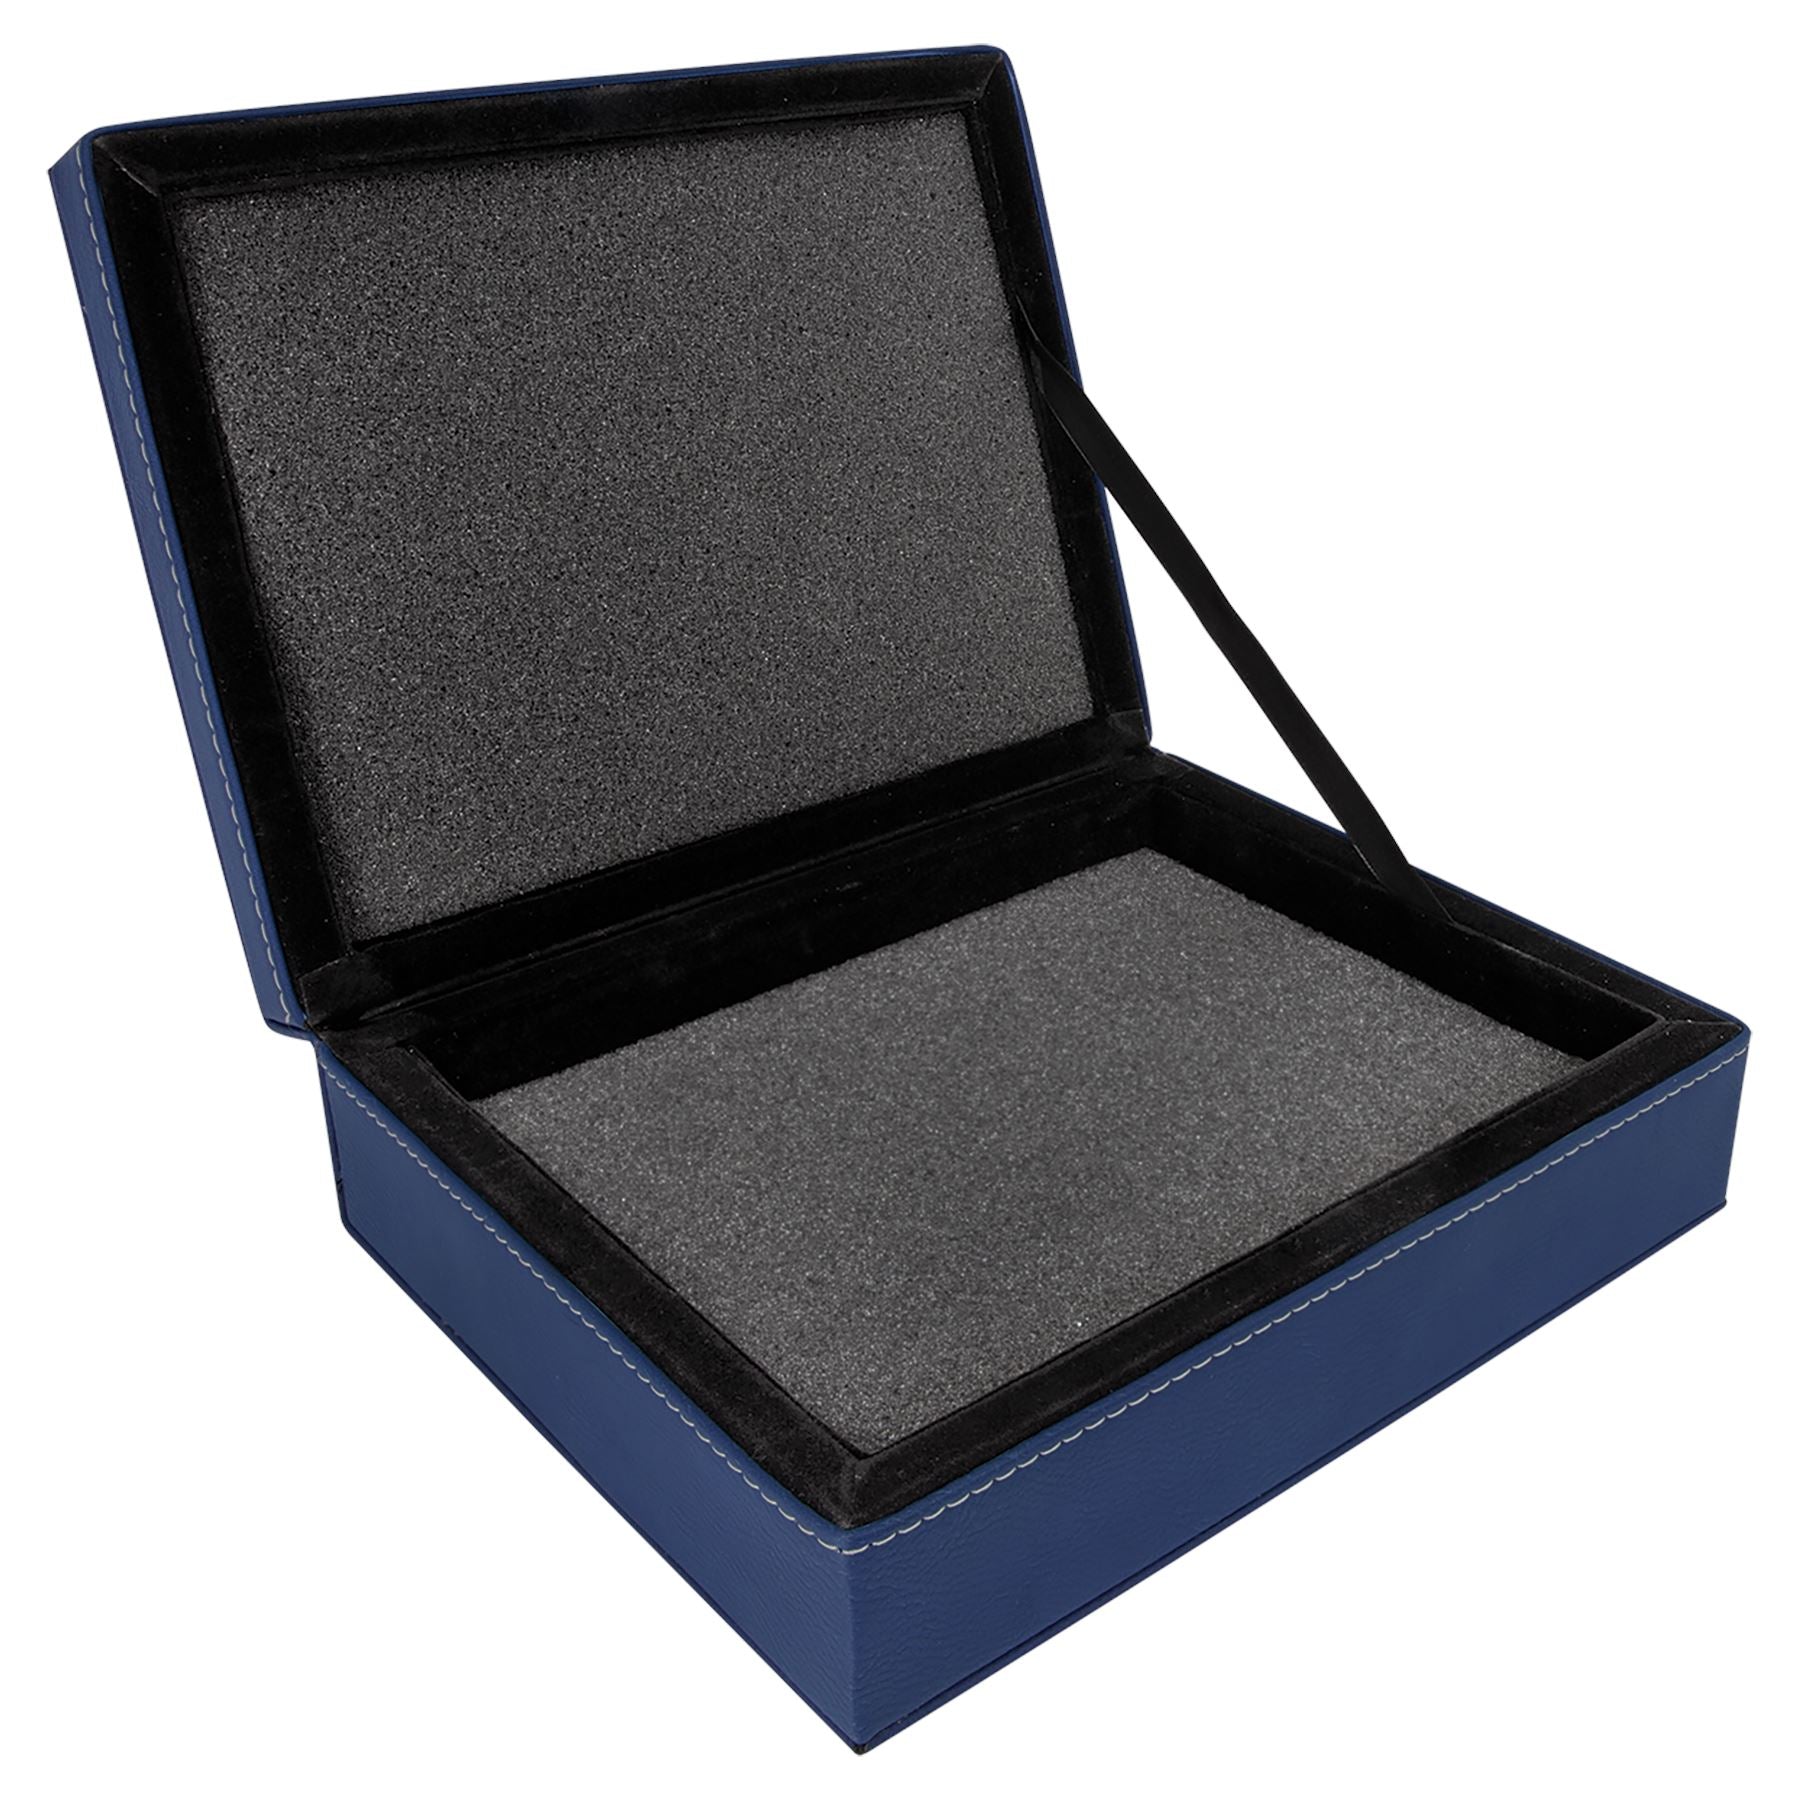 Premium Gift Box, 8" x 6 3/8" Laserable Leatherette Gift Box Craftworks NW 